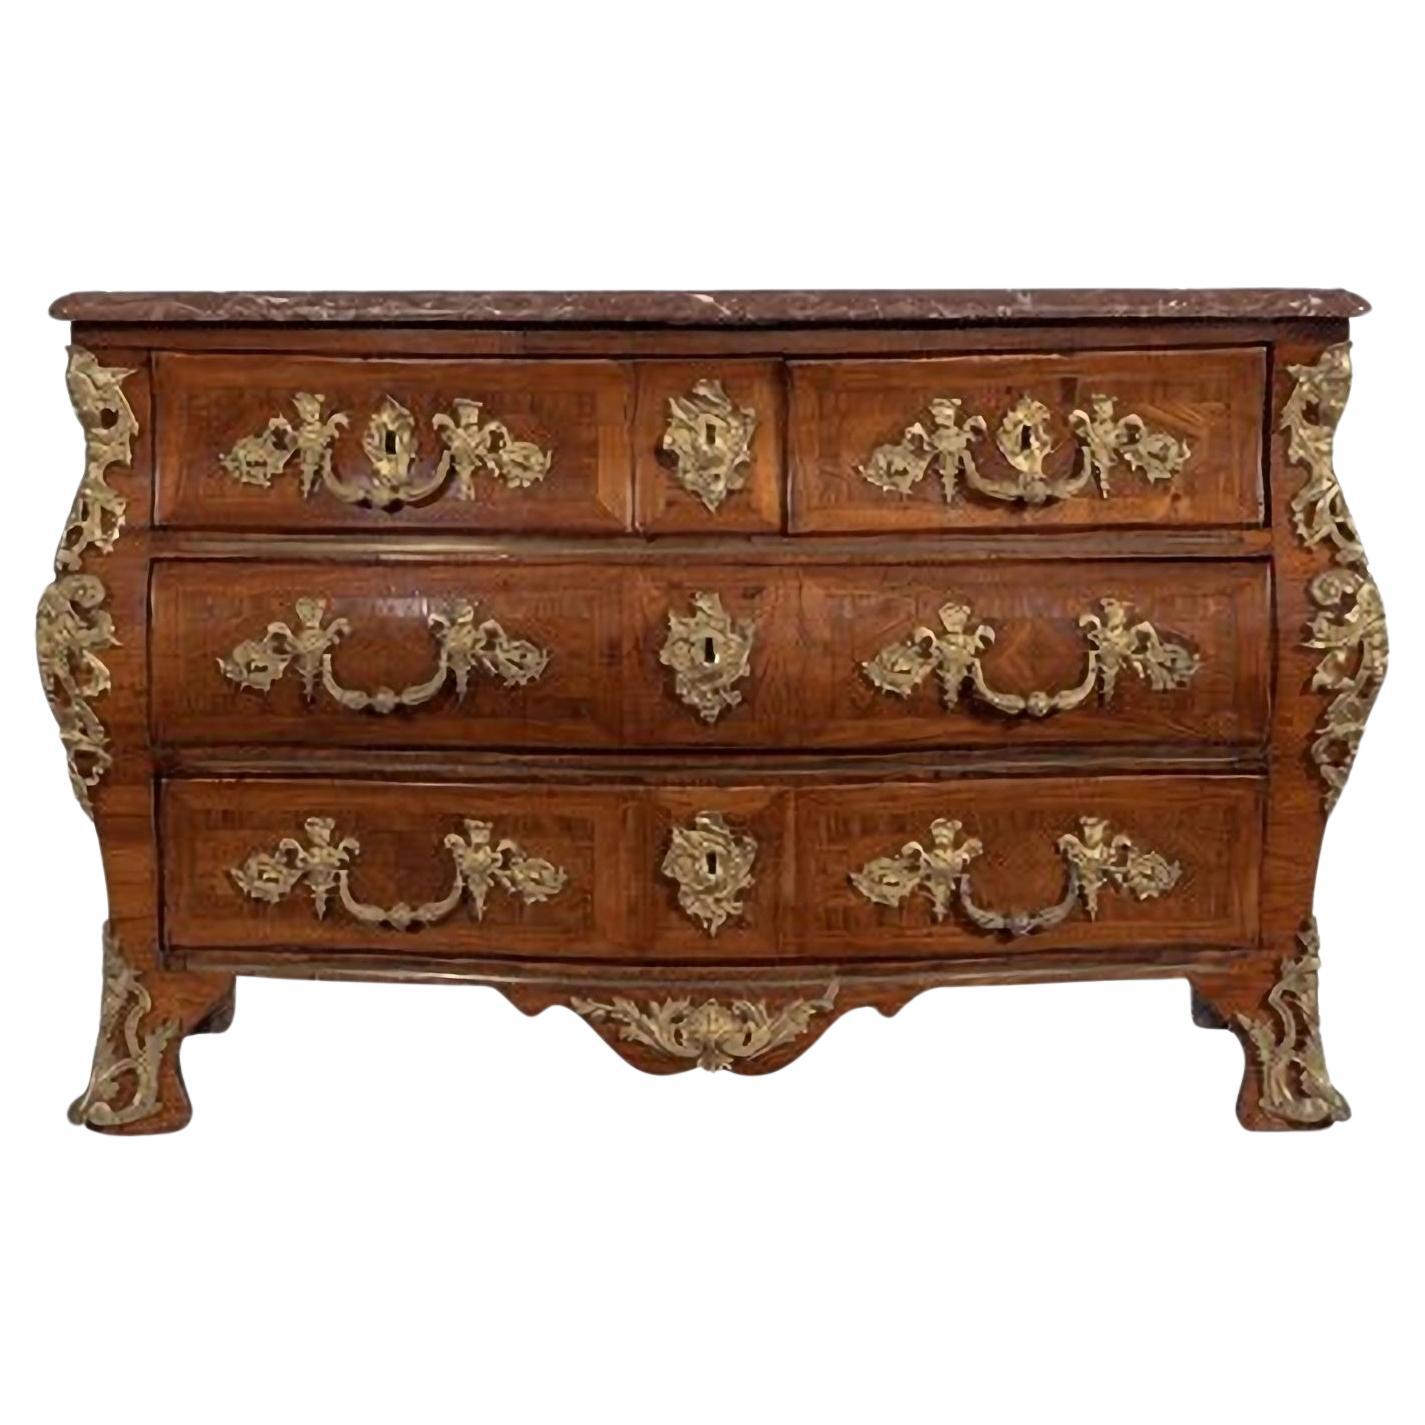 An Important Serpentine Fronted Tombeau Shaped Kingwood Commode, 18th Century For Sale